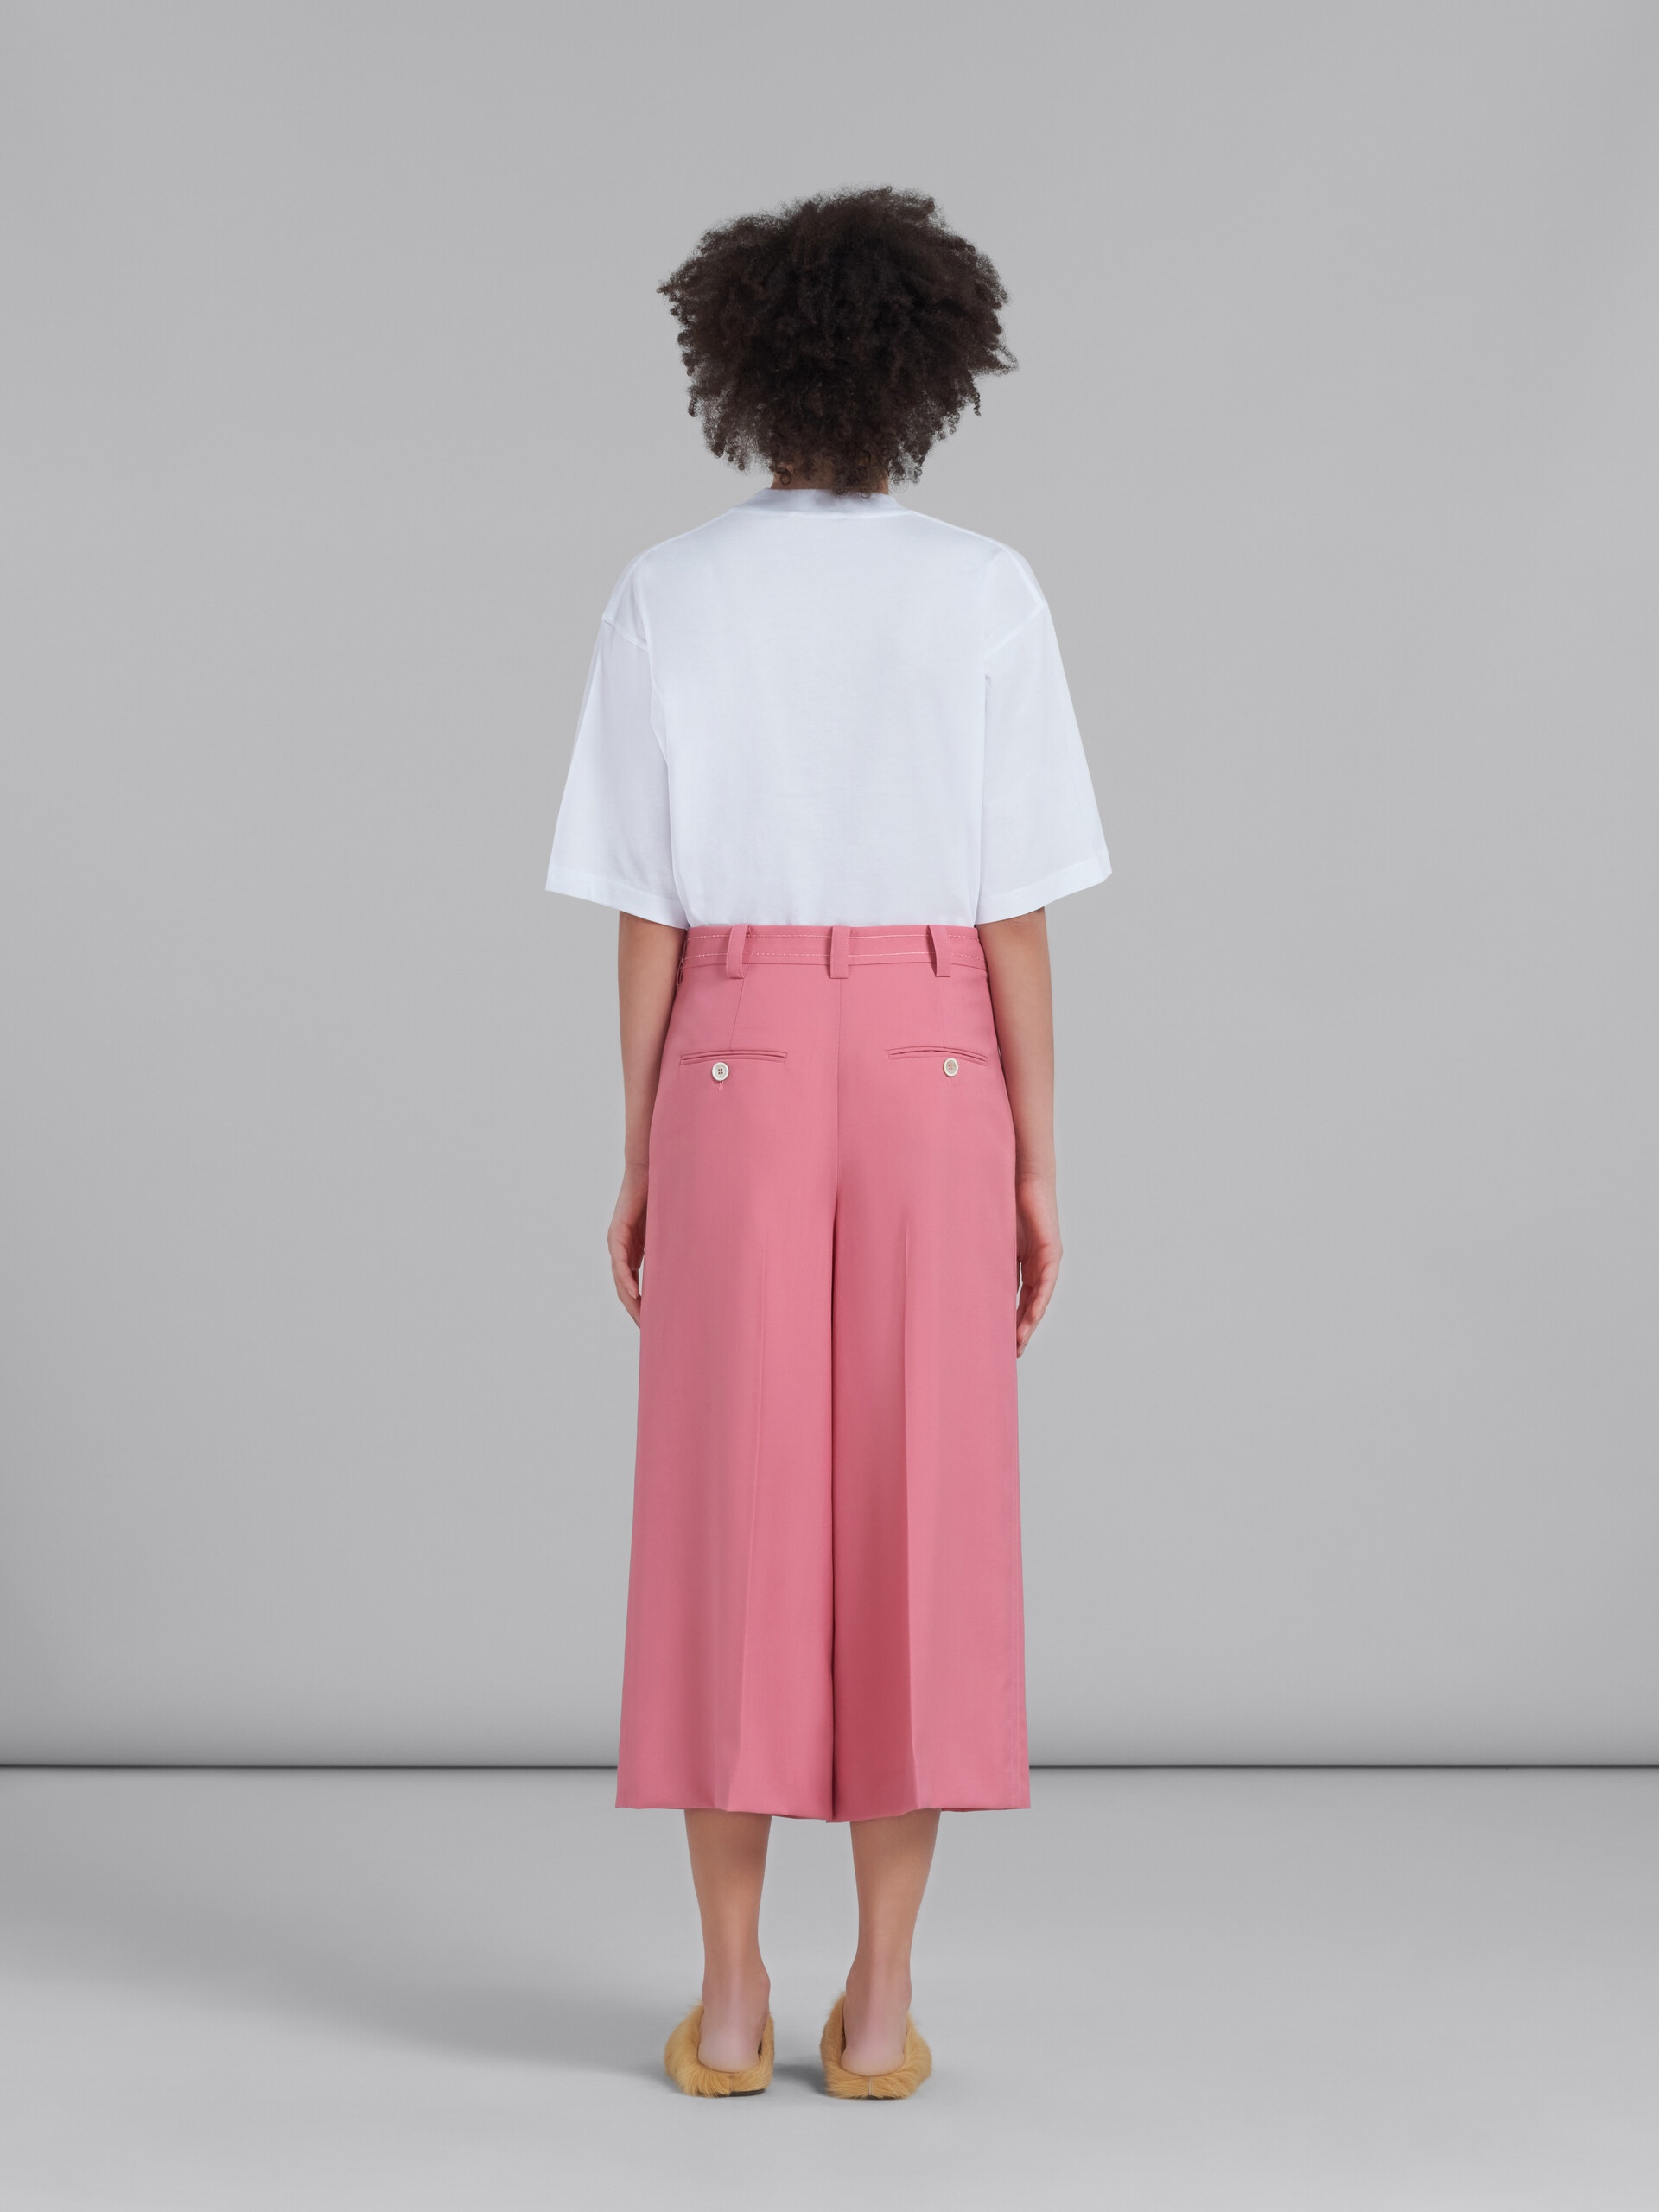 Marni CROPPED PANTS IN PINK TROPICAL WOOL | REVERSIBLE